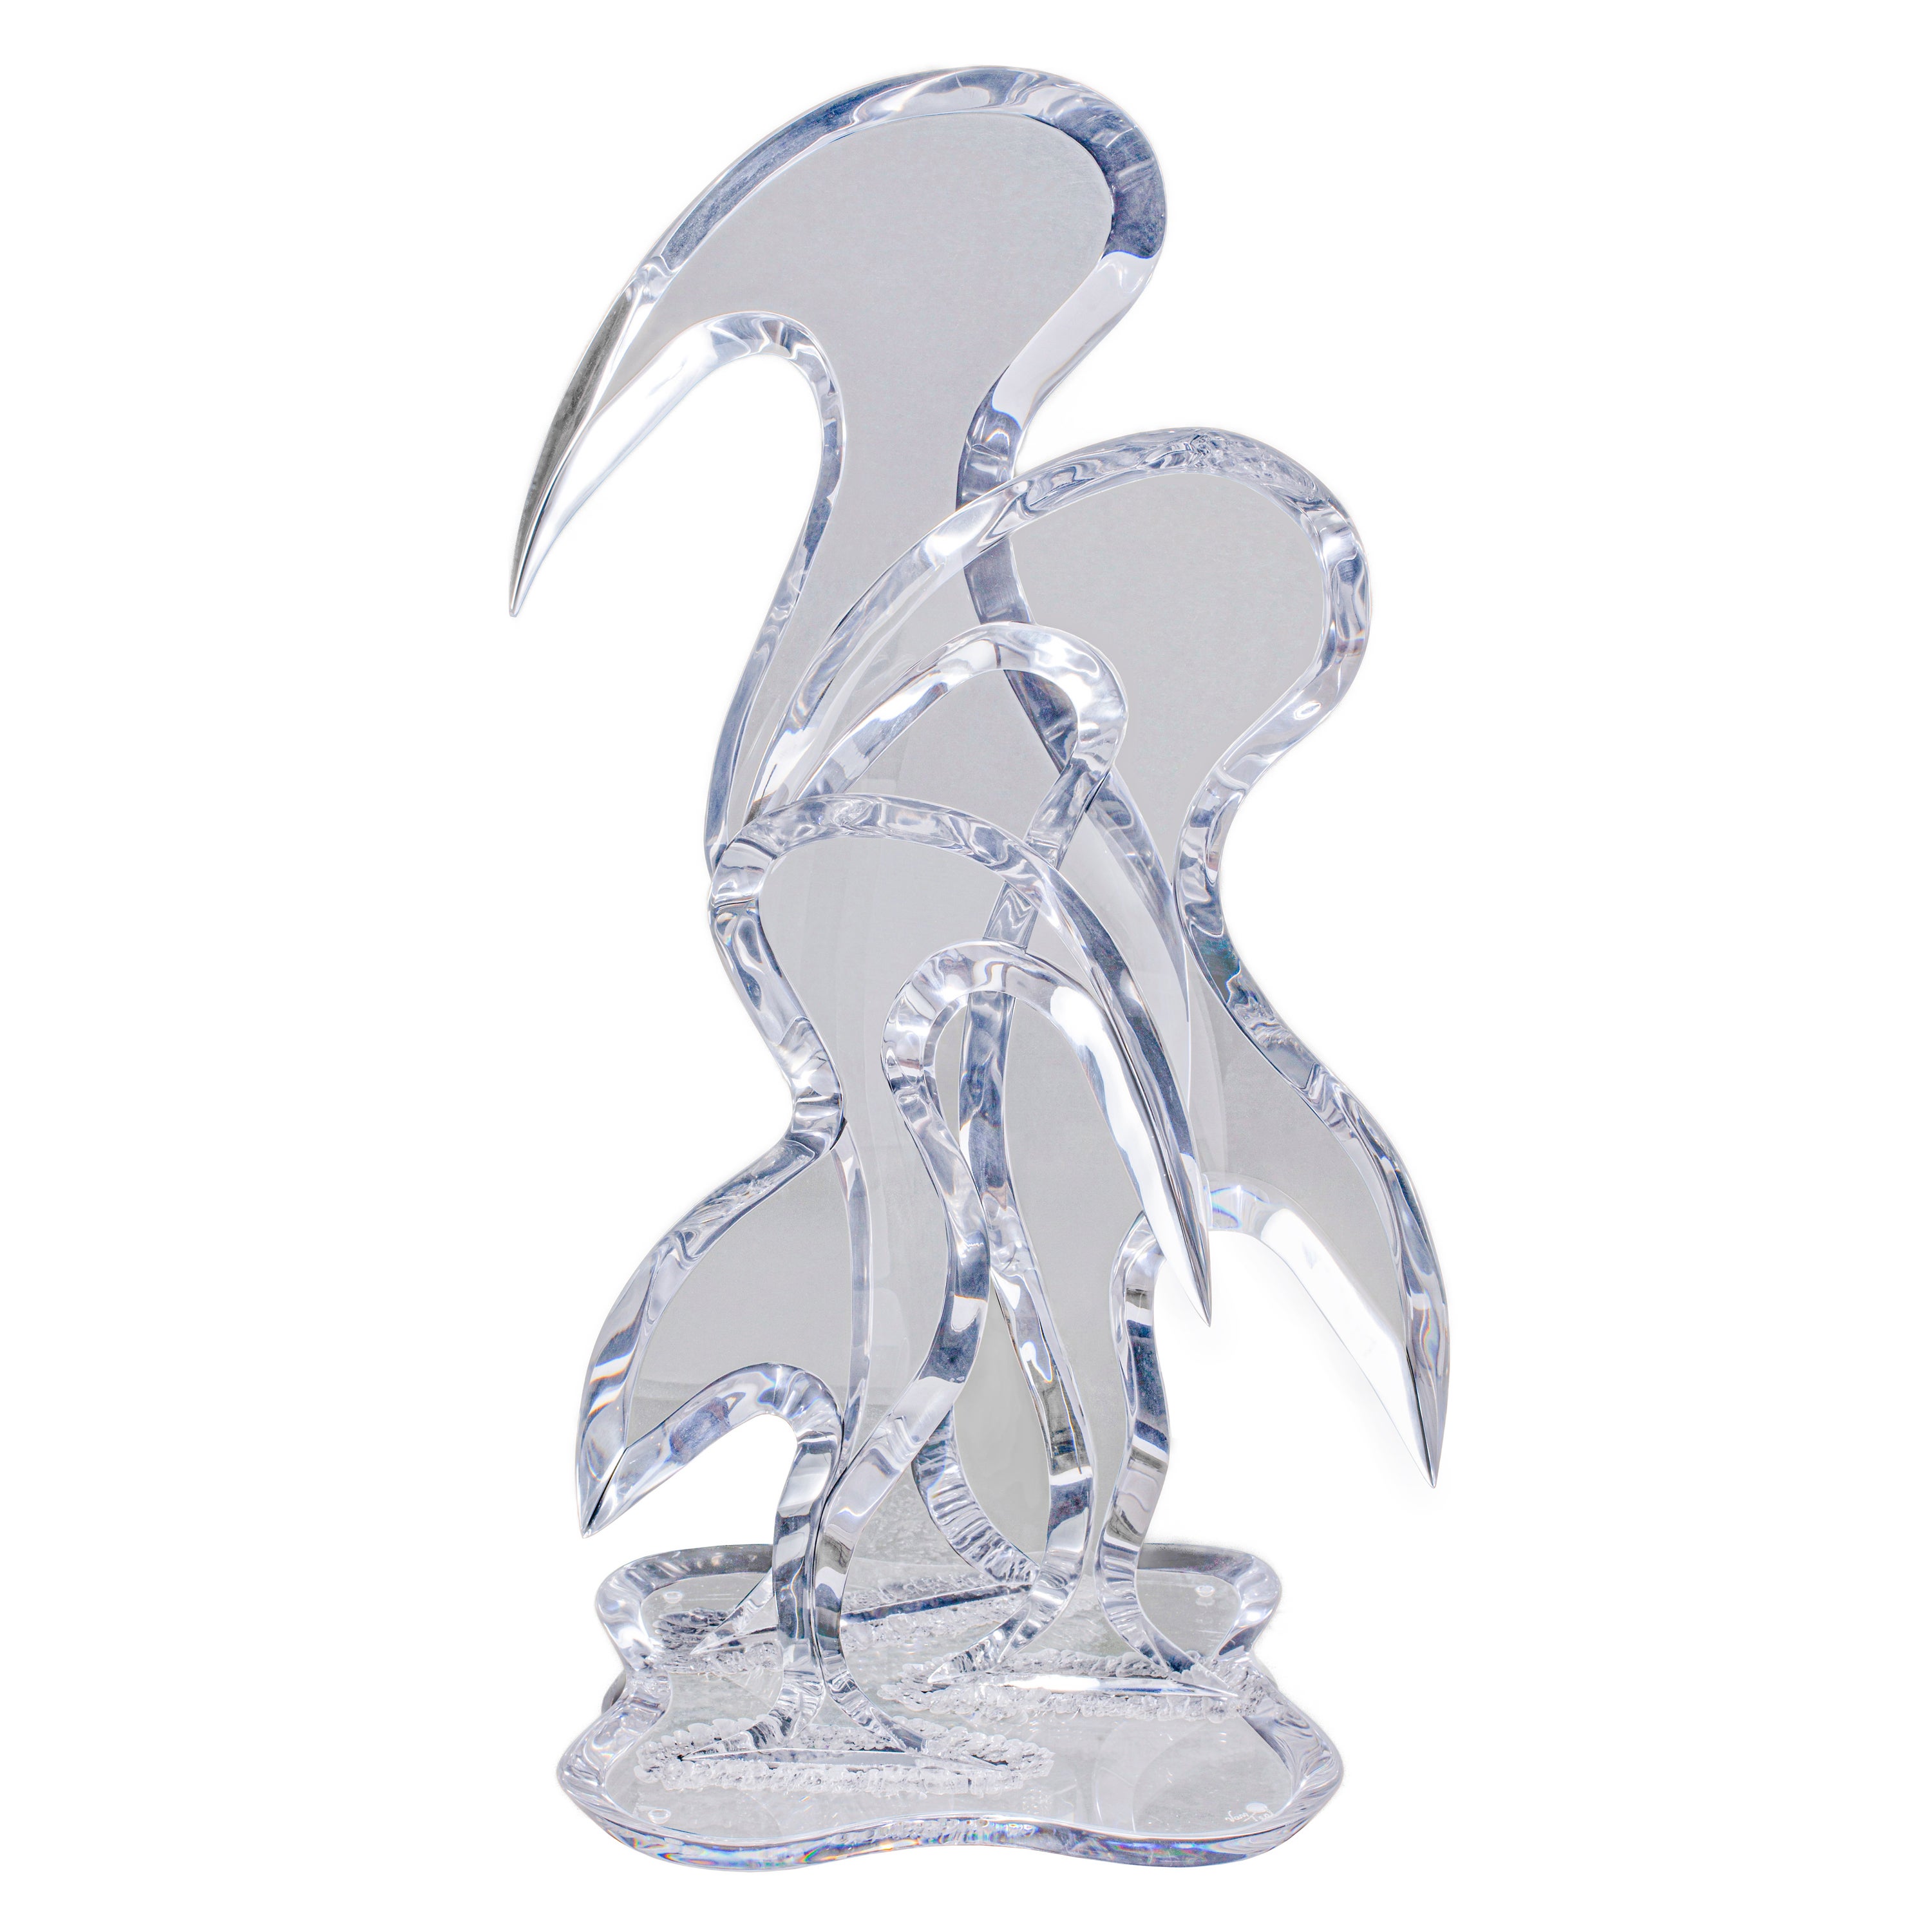 Hivo Van Teal Carved Lucite Translucent Triple Stylized Bird Table Art Sculpture For Sale